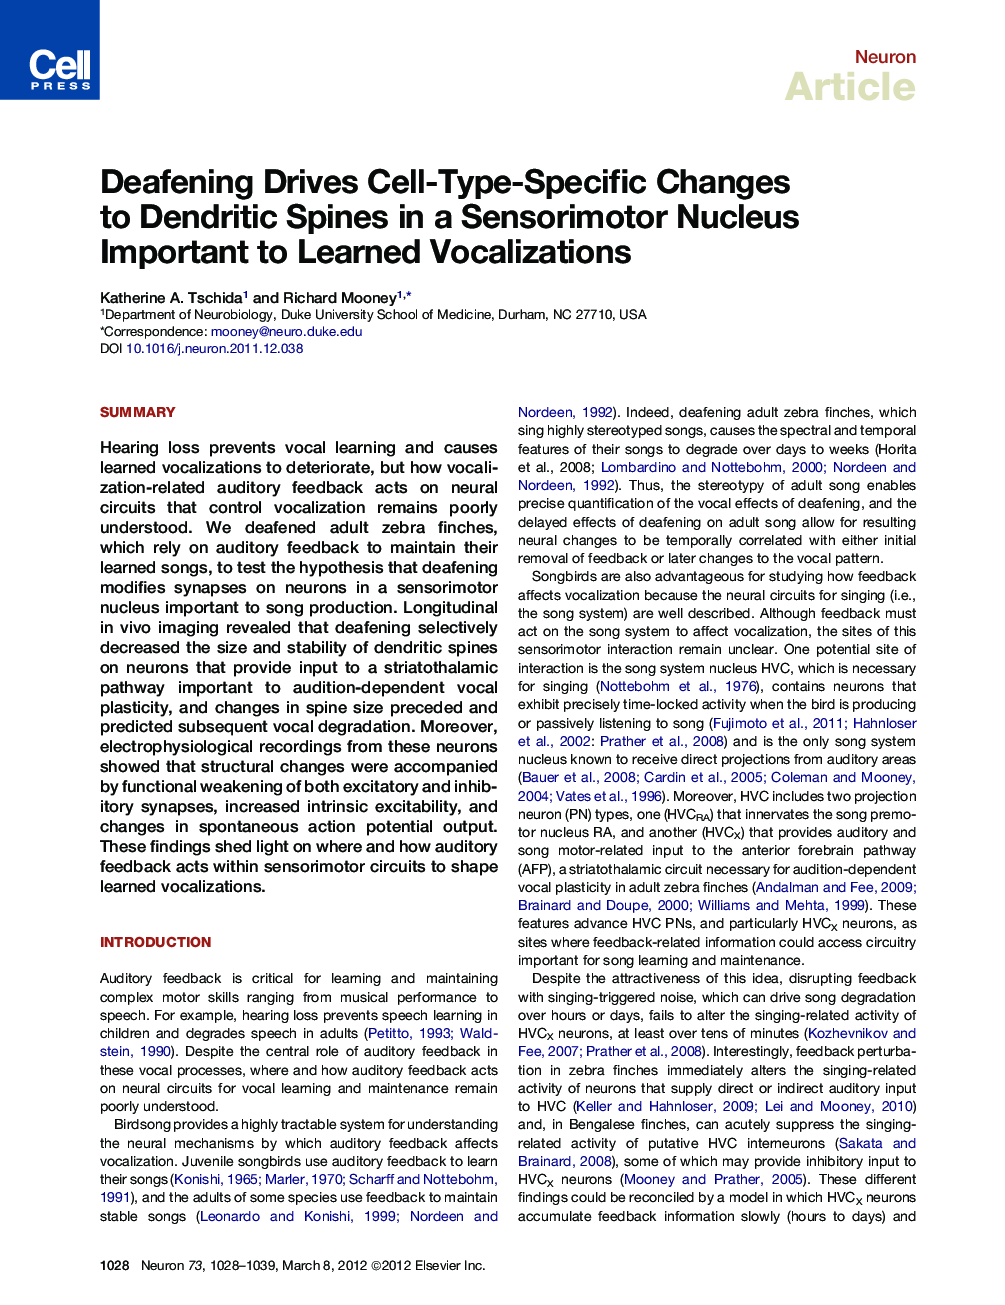 Deafening Drives Cell-Type-Specific Changes to Dendritic Spines in a Sensorimotor Nucleus Important to Learned Vocalizations